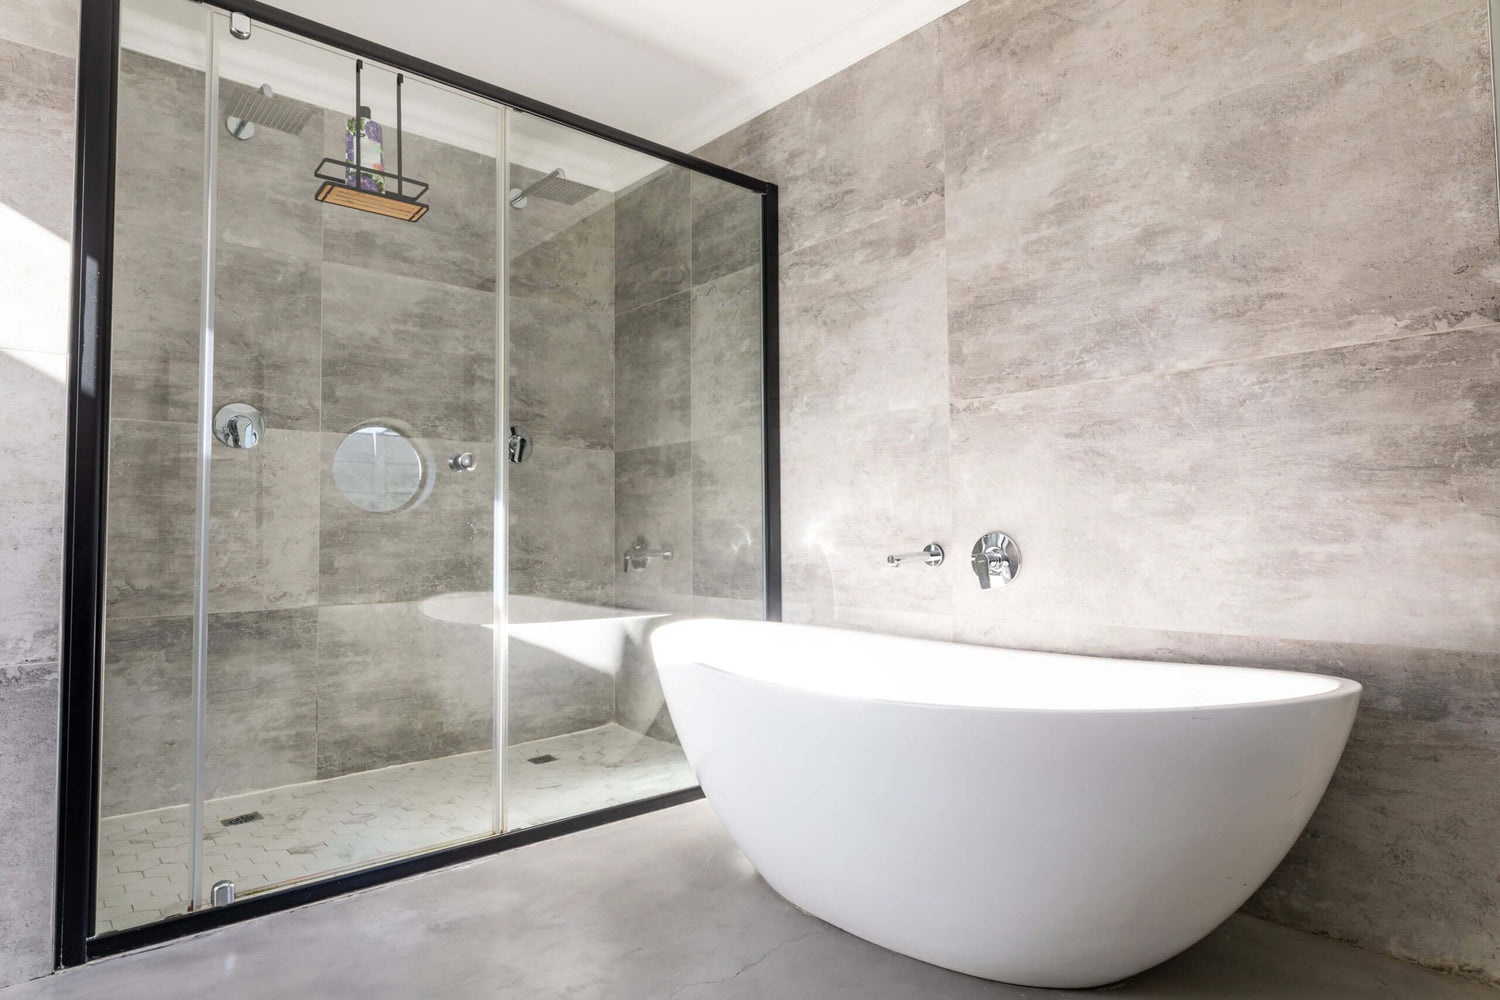 Shower Waterproofing Guide: How To Waterproof Your Shower